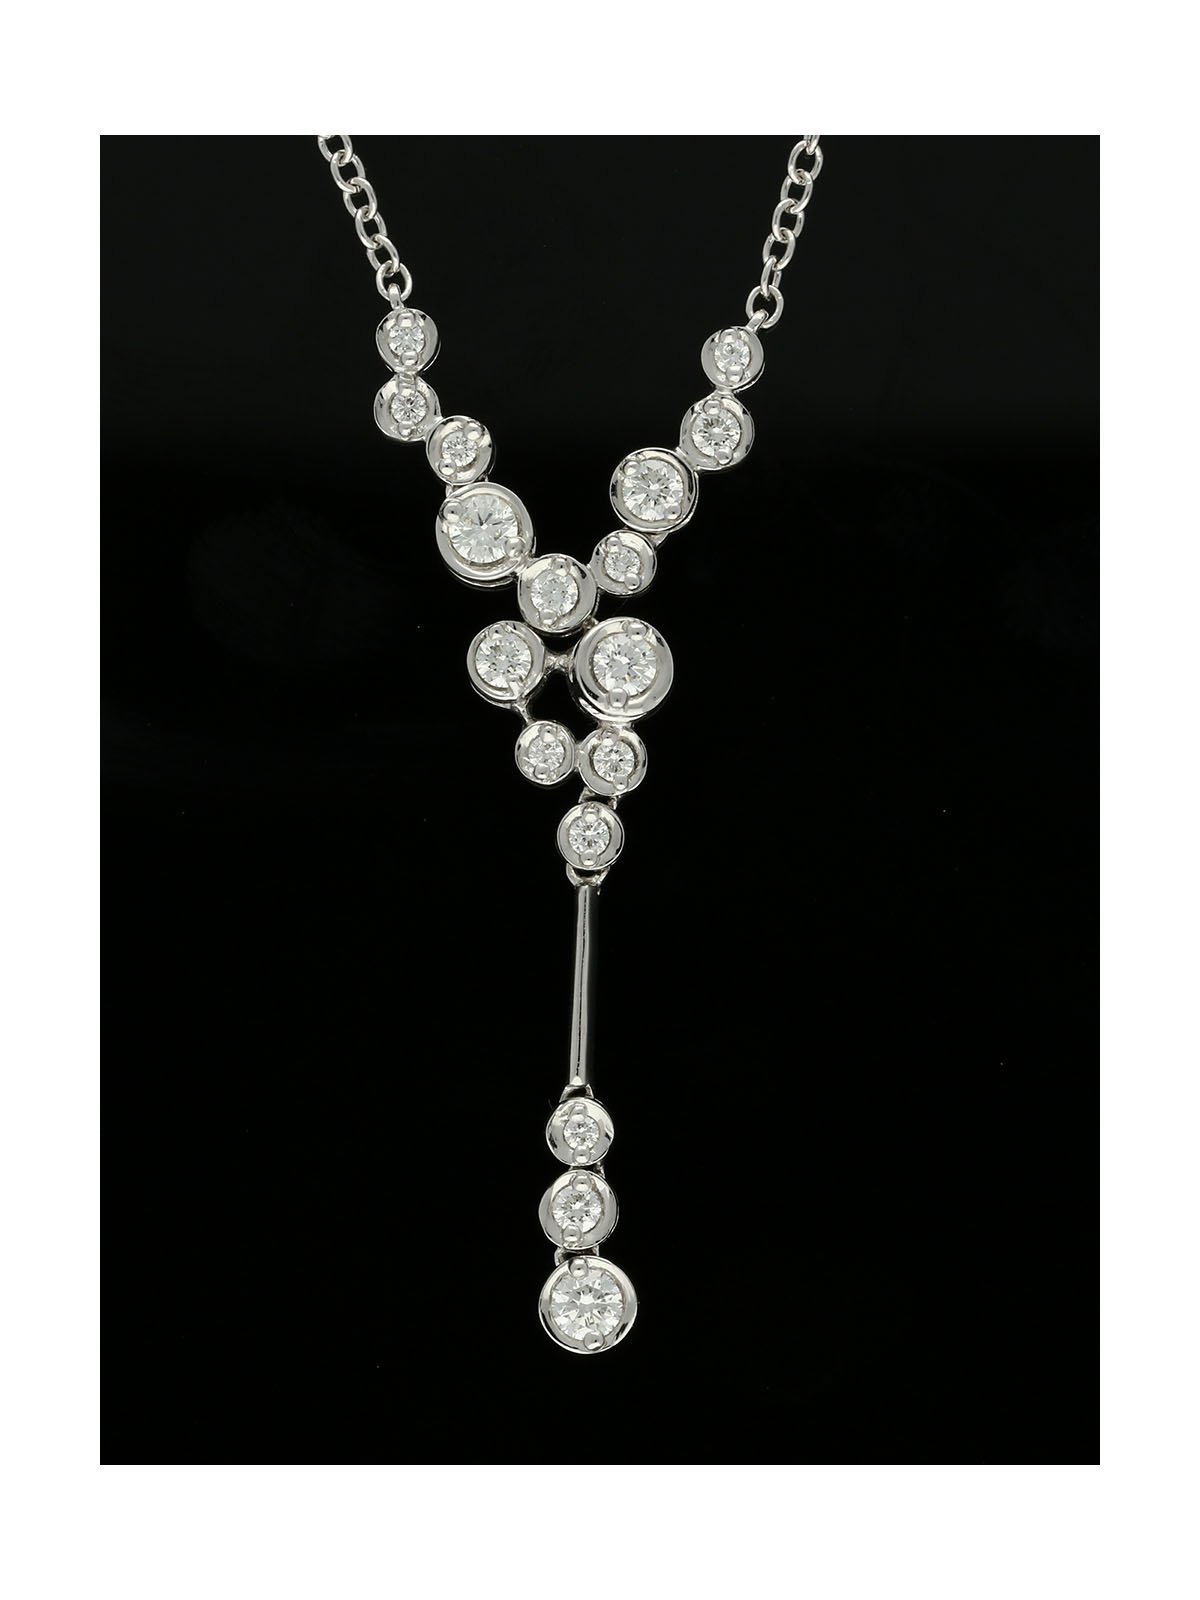 Diamond Cluster Drop Necklace 0.56ct in 18ct White Gold